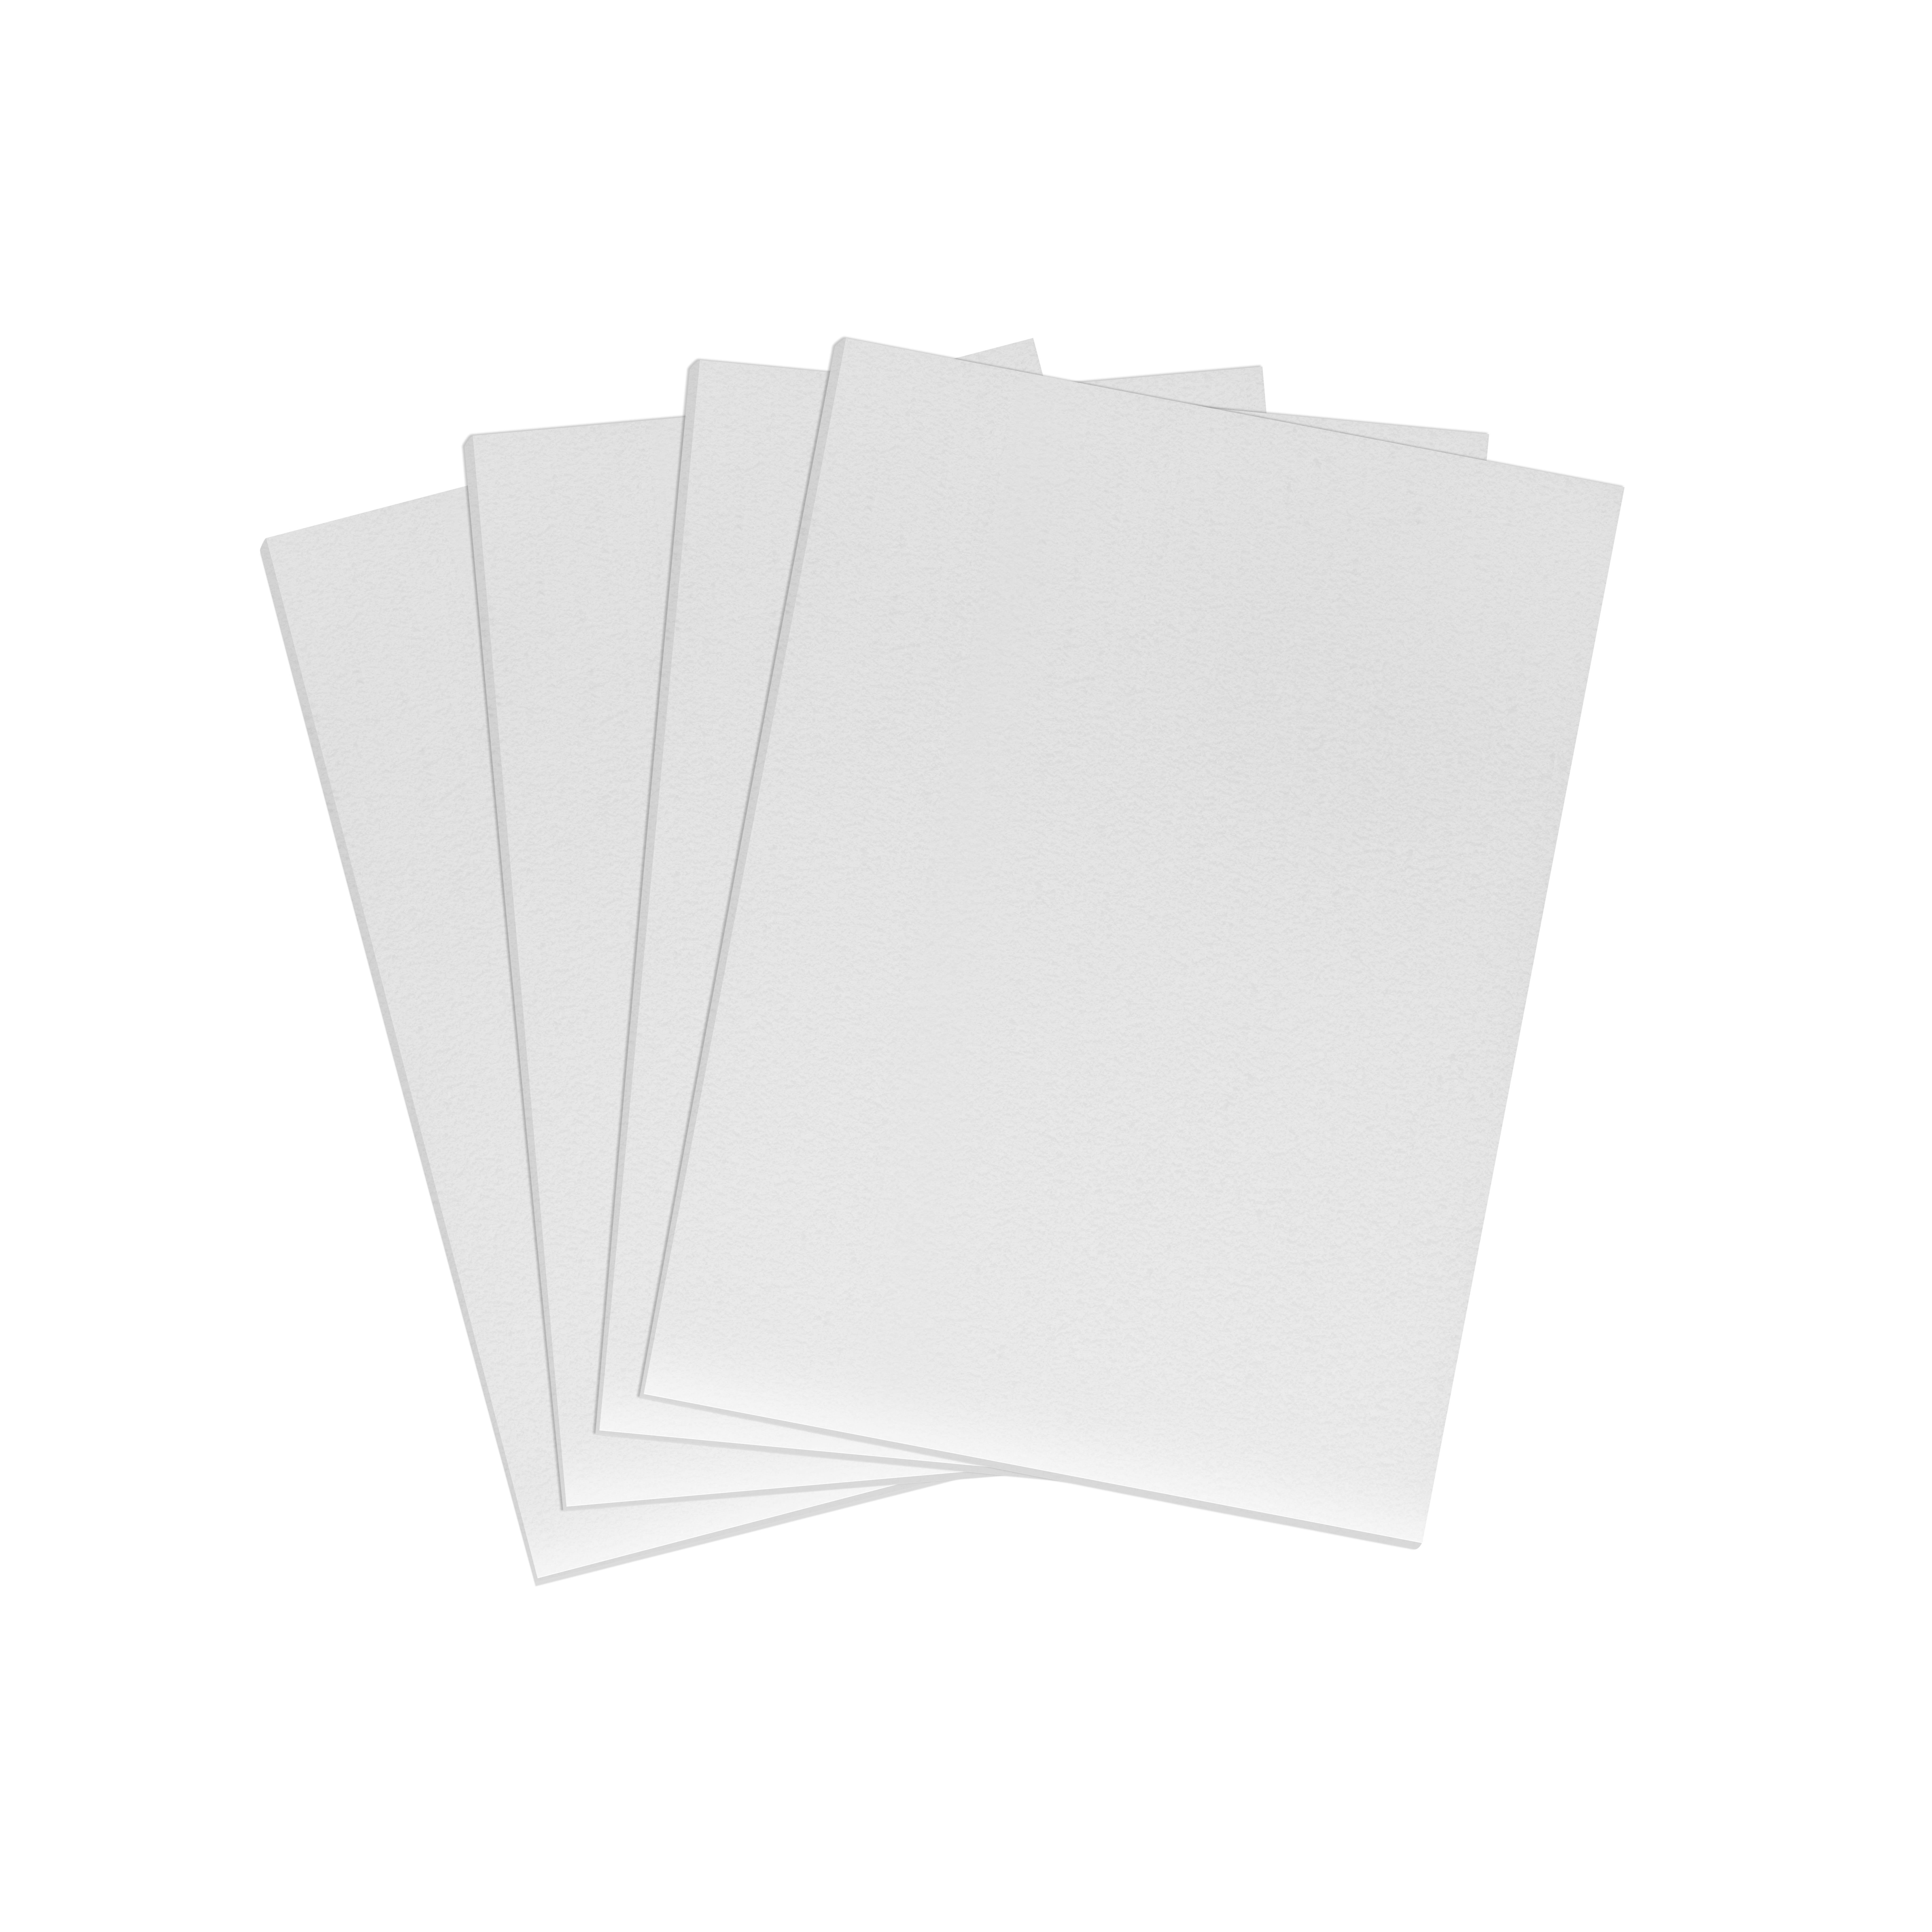  MEARCOOH Foam Sheets Crafts White 9x12 Inch 2mm Eva Color Craft Foam  Paper for Crafts Project Preschoolers Classroom Scrapbooking DIY Cosplay(10  Sheets) : Arts, Crafts & Sewing